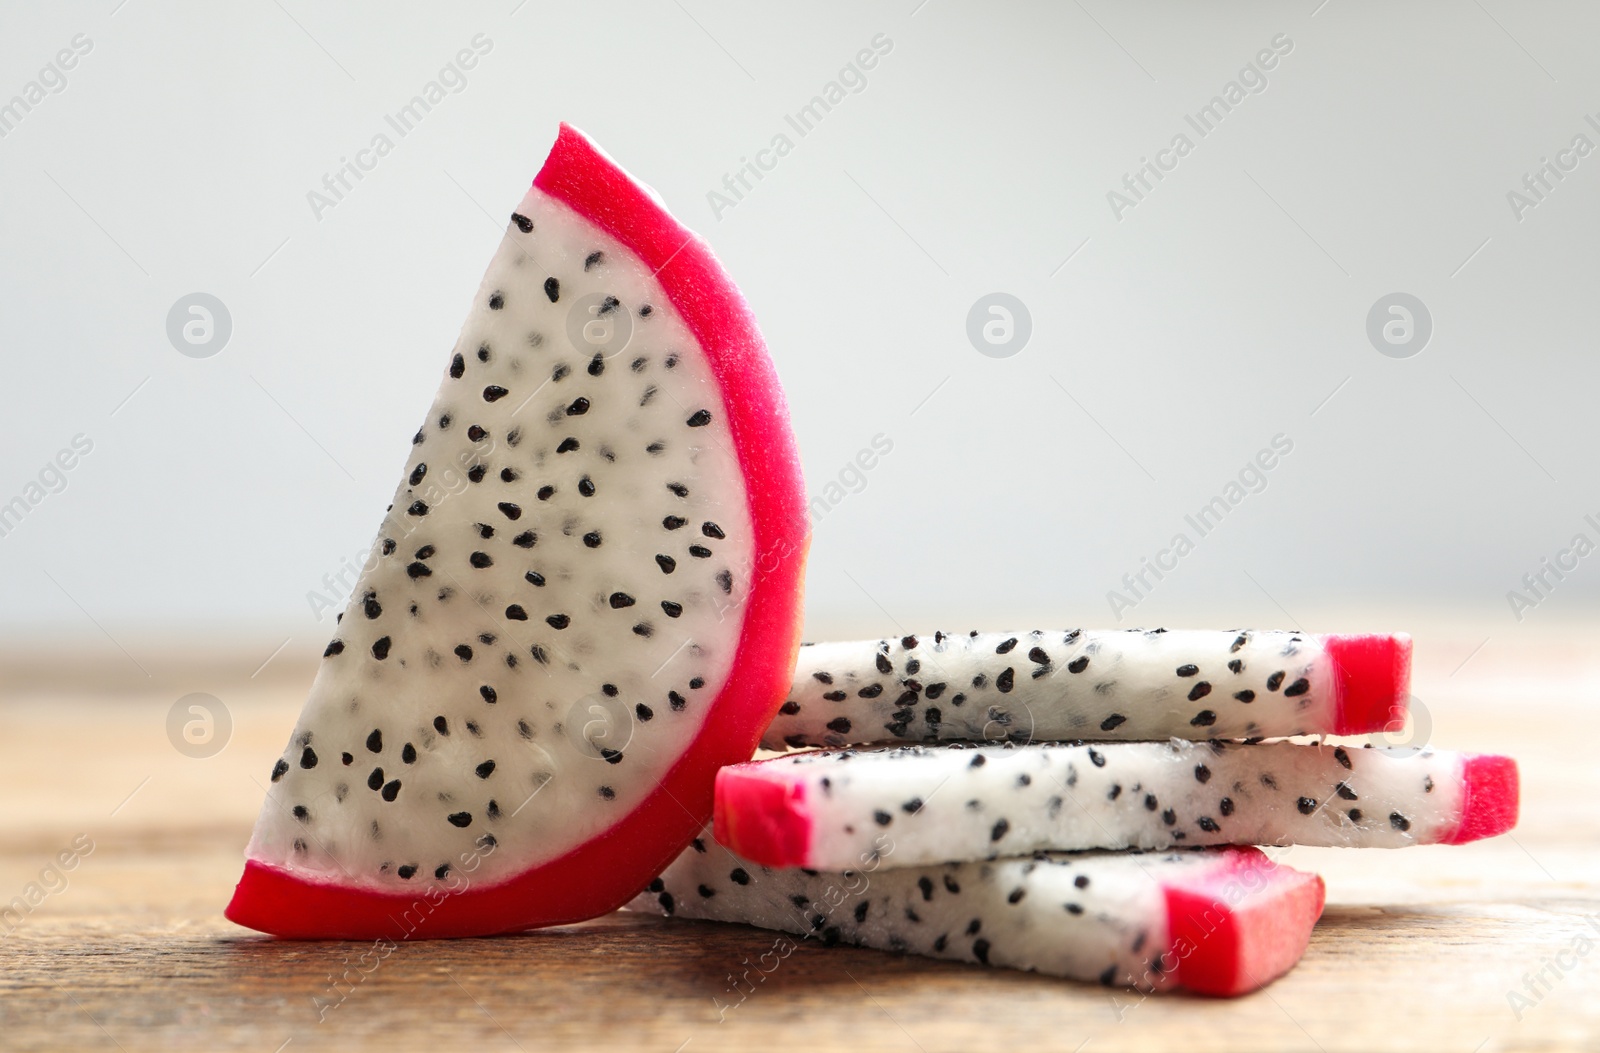 Photo of Slices of delicious ripe dragon fruit (pitahaya) on wooden table